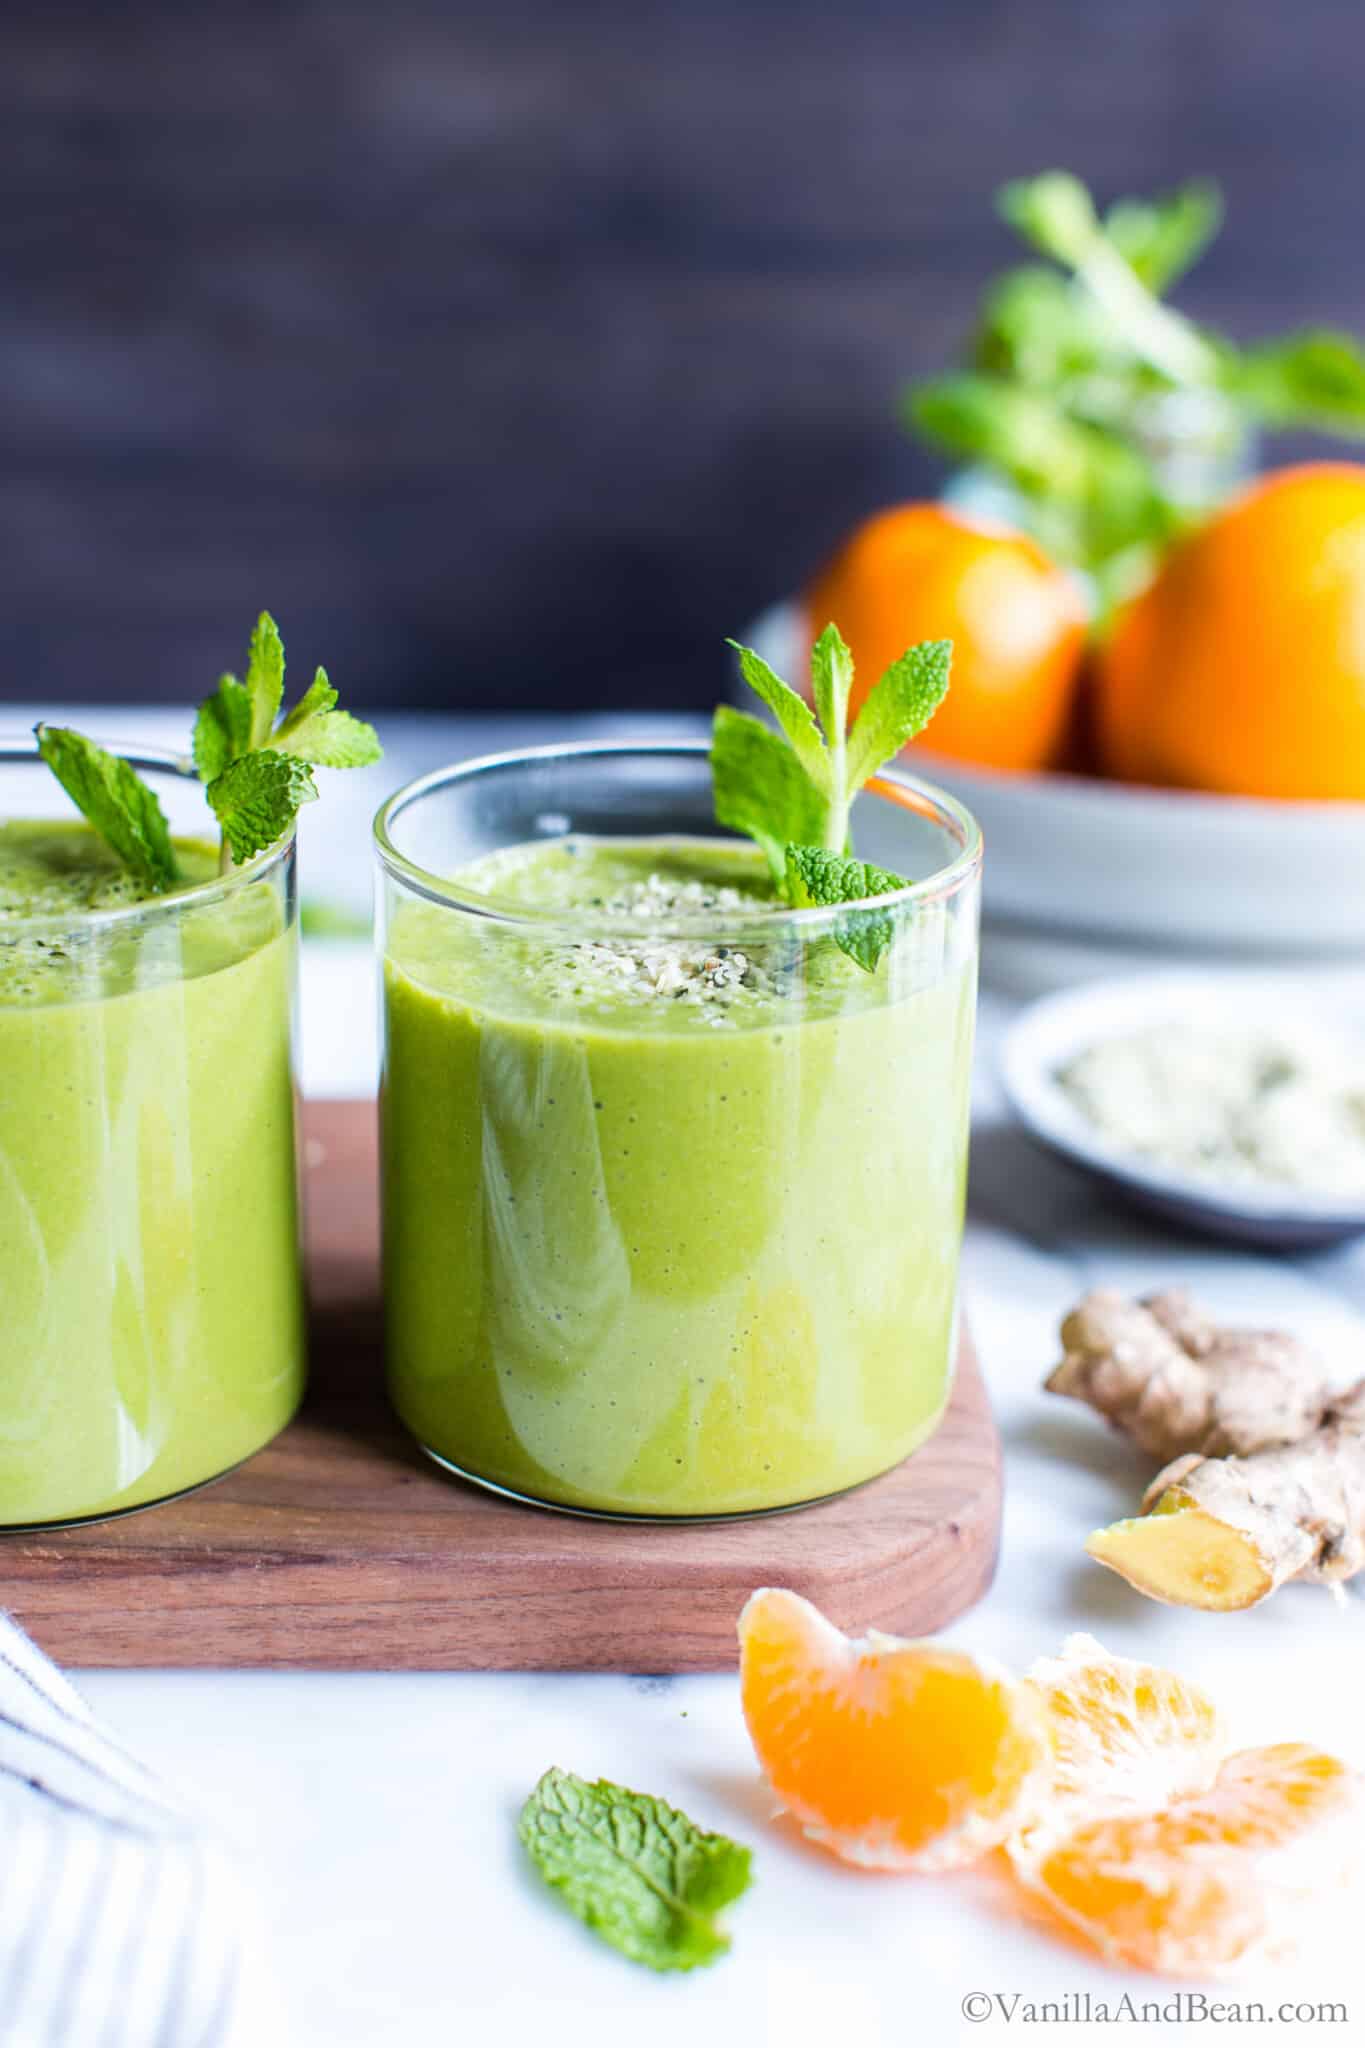 7. Citrus Ginger Green Smoothie With Mint